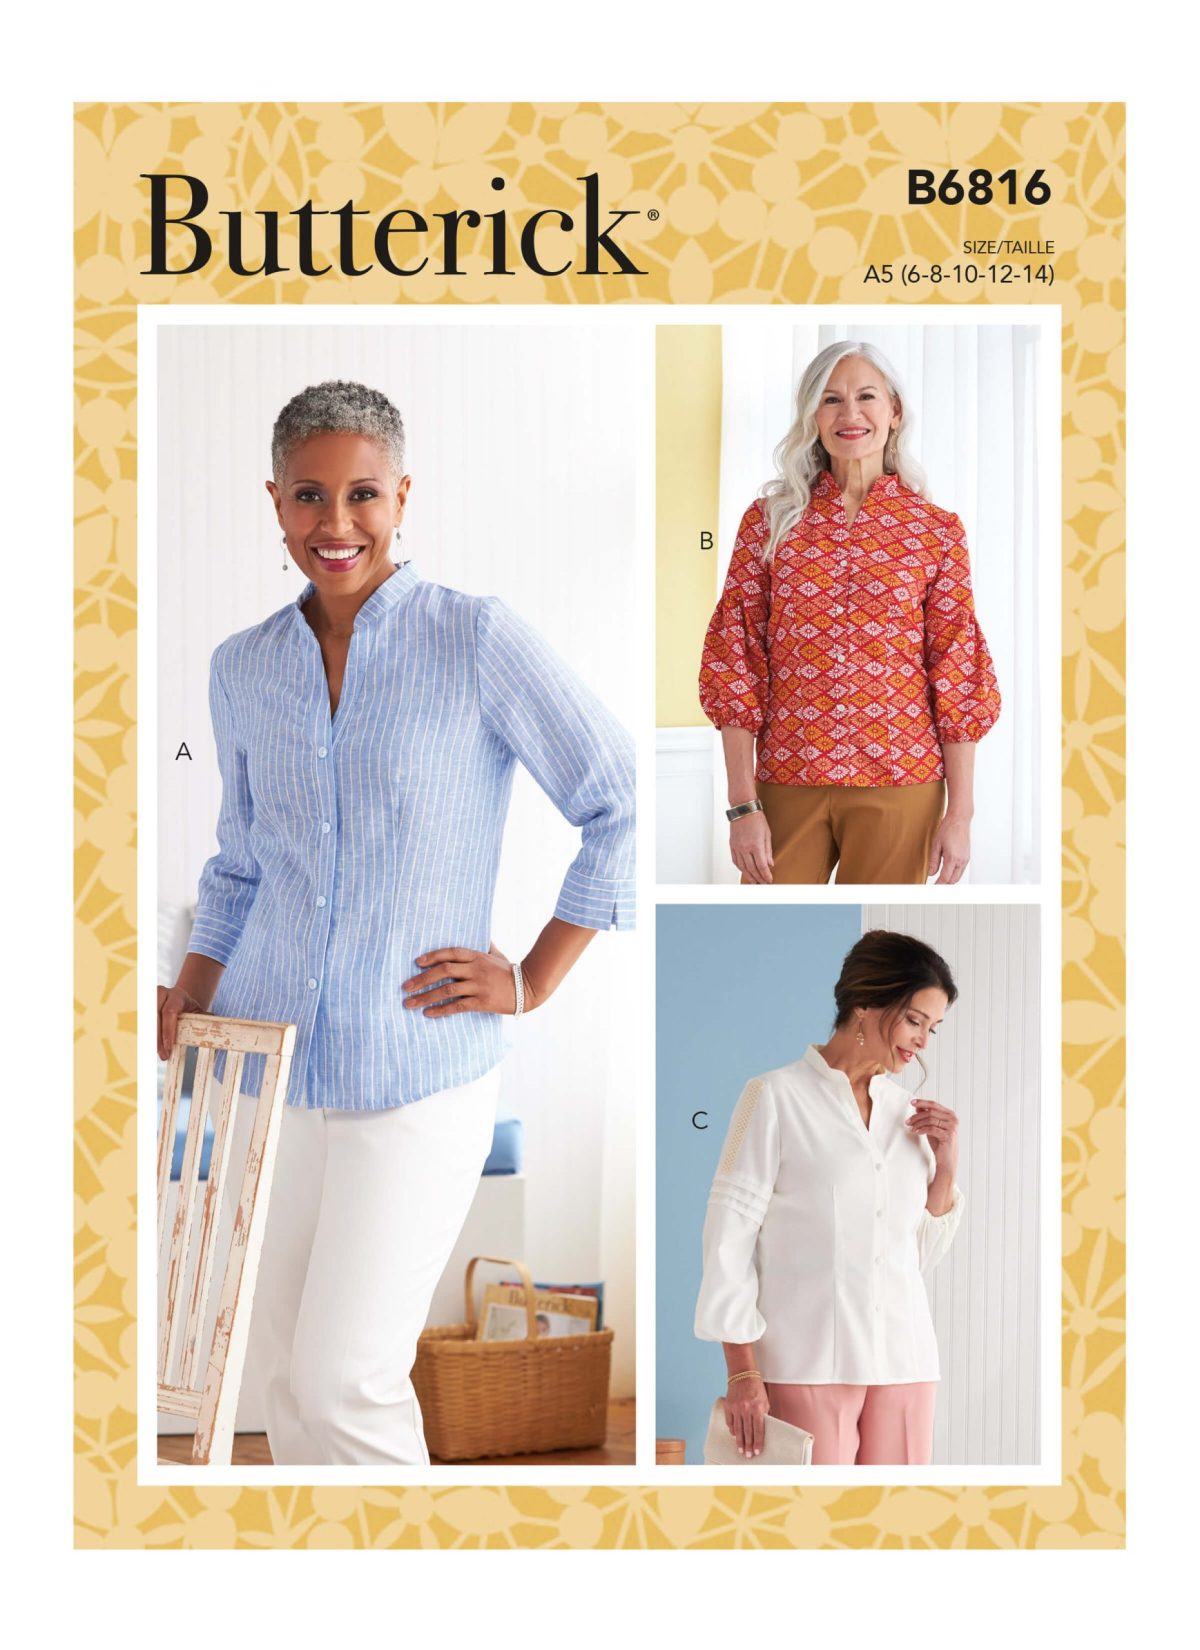 Butterick Sewing Pattern B6816 Misses' Top